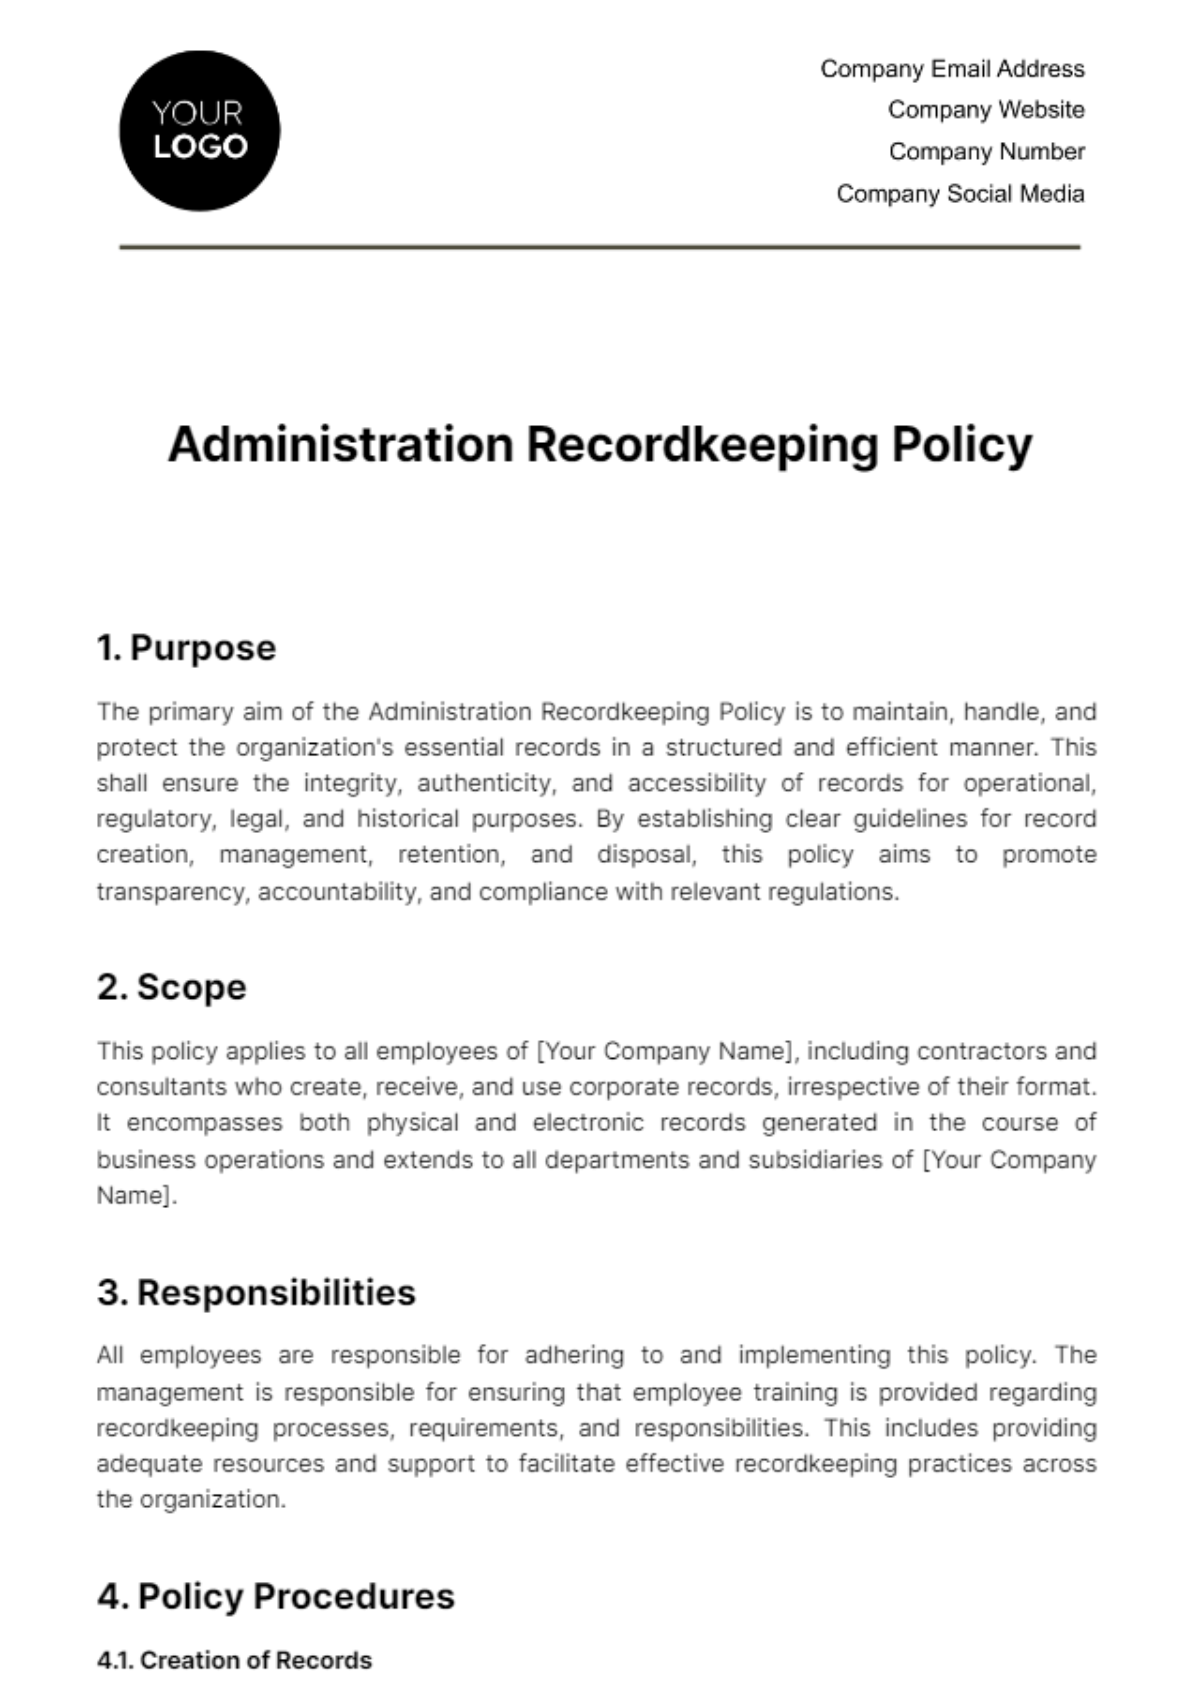 Free Administration Recordkeeping Policy Template